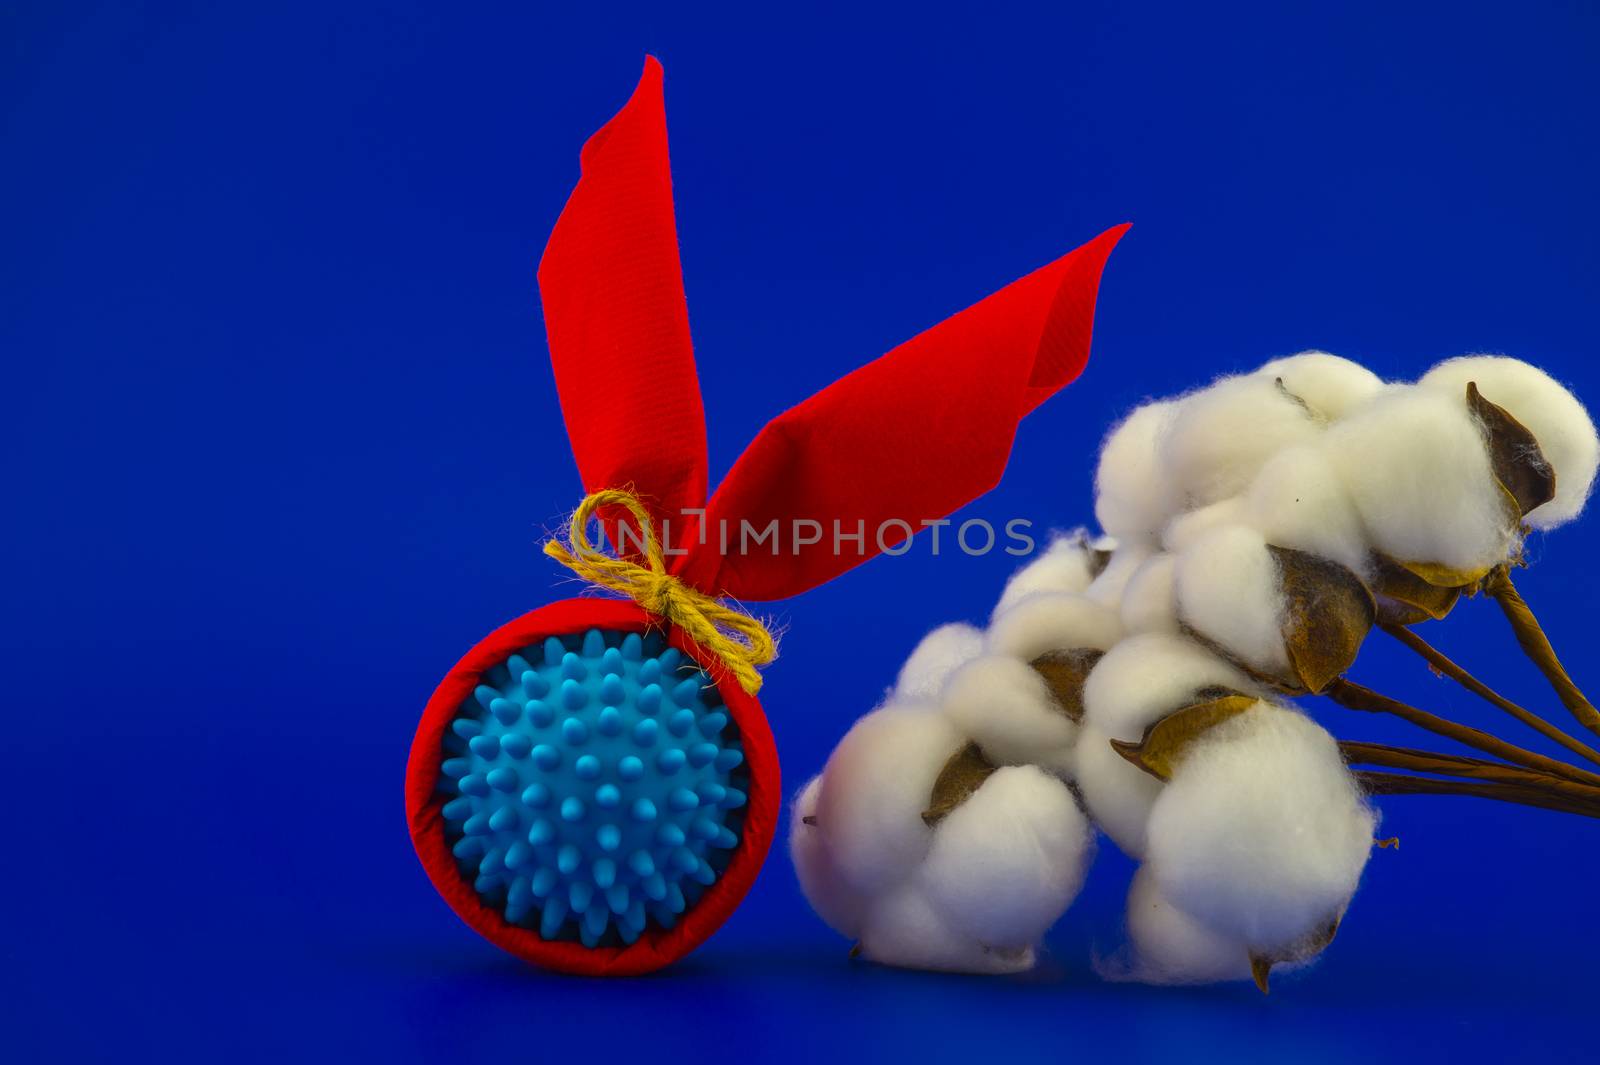 Virus molecule and natural cotton bolls by NetPix